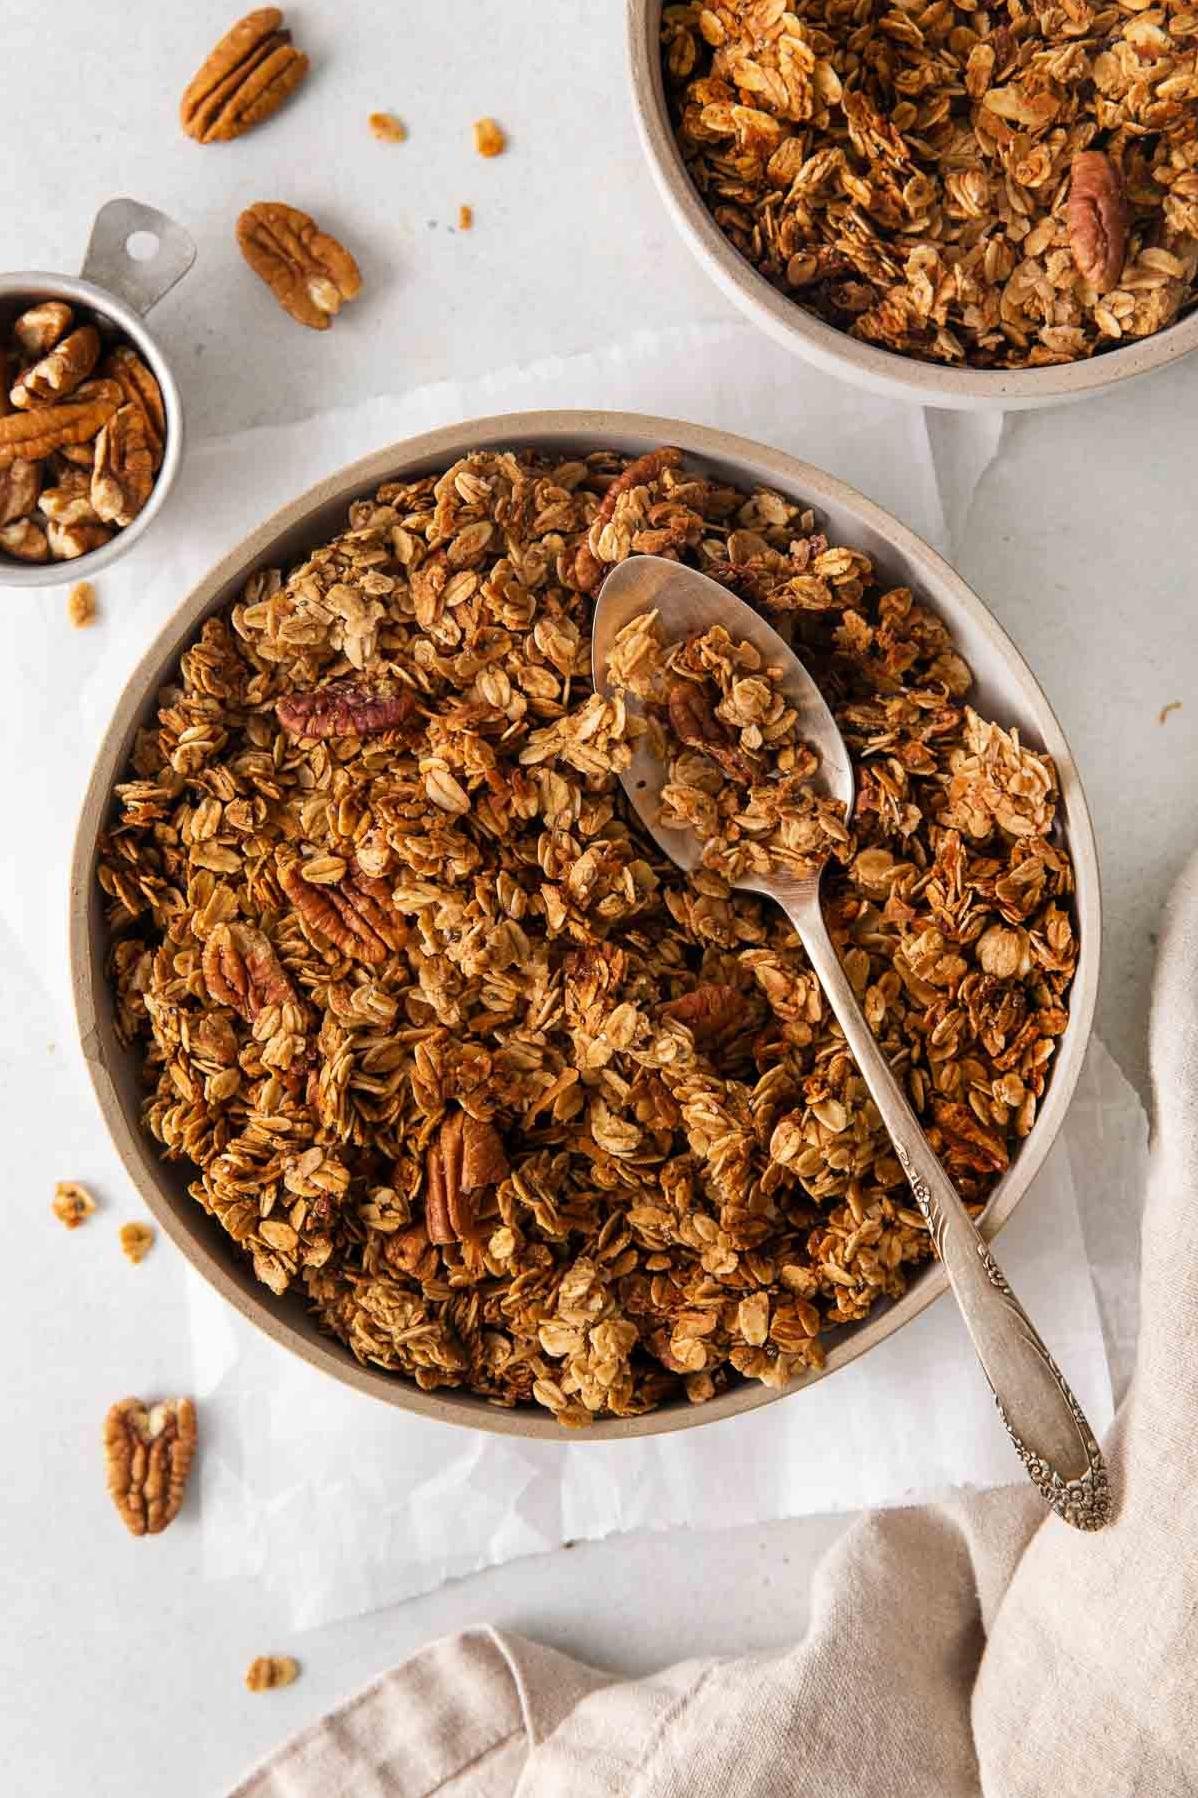  Fill your kitchen with the aroma of freshly baked granola